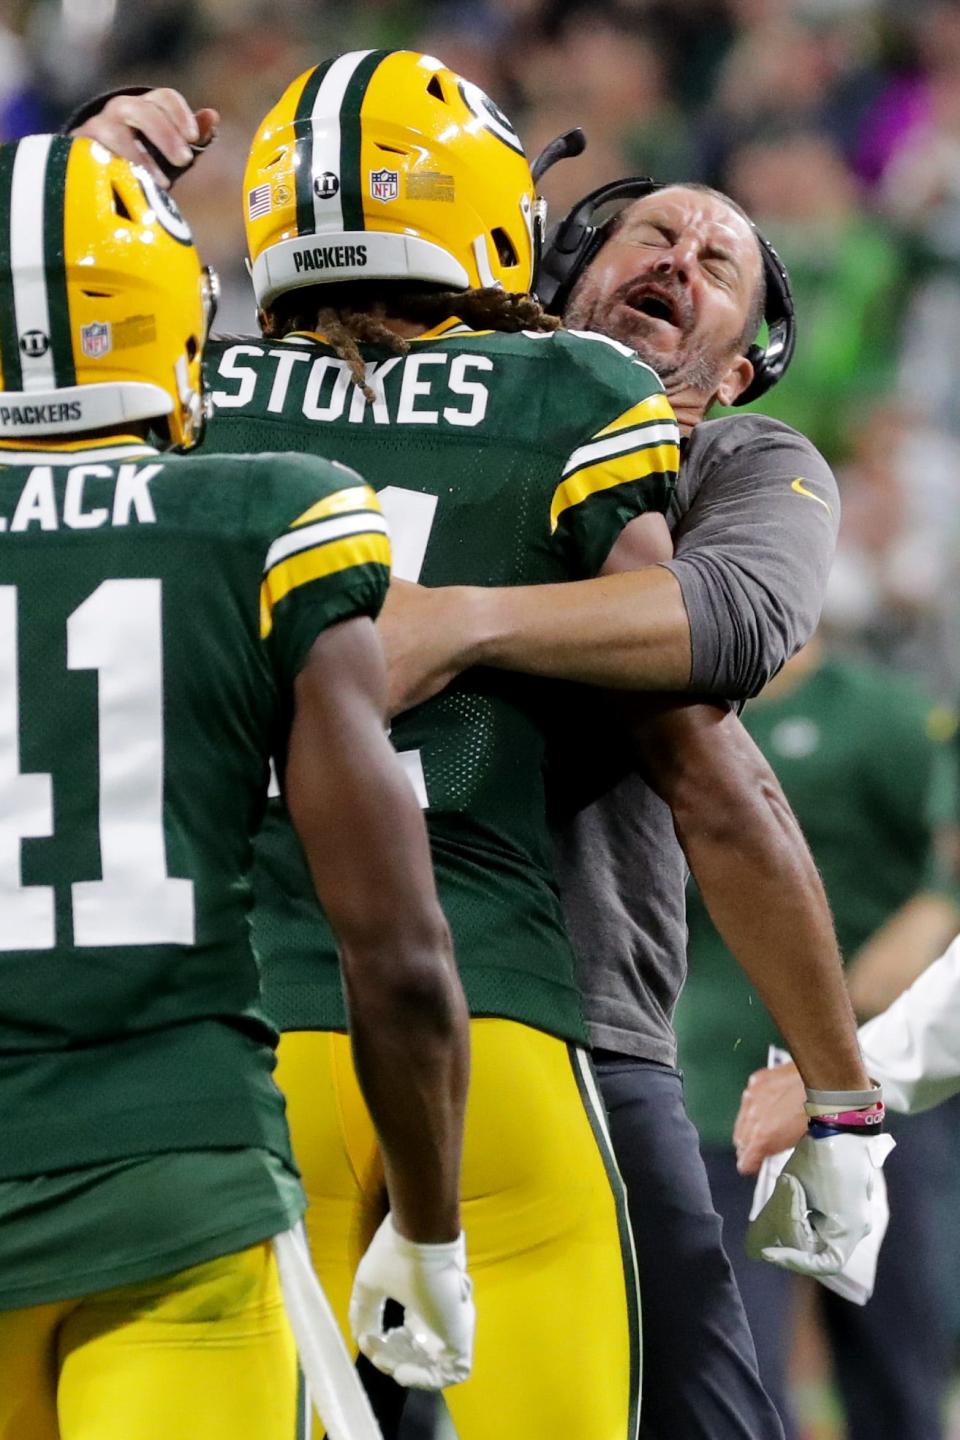 Green Bay Packers outside linebackers coach Mike Smith hugs cornerback Eric Stokes (21) after they stopped the Detroit Lions on fourth down during the third quarter of their game Monday, September 20, 2021 at Lambeau Field in Green Bay, Wis. The Green Bay Packers beat the Detroit Lions 35-17.